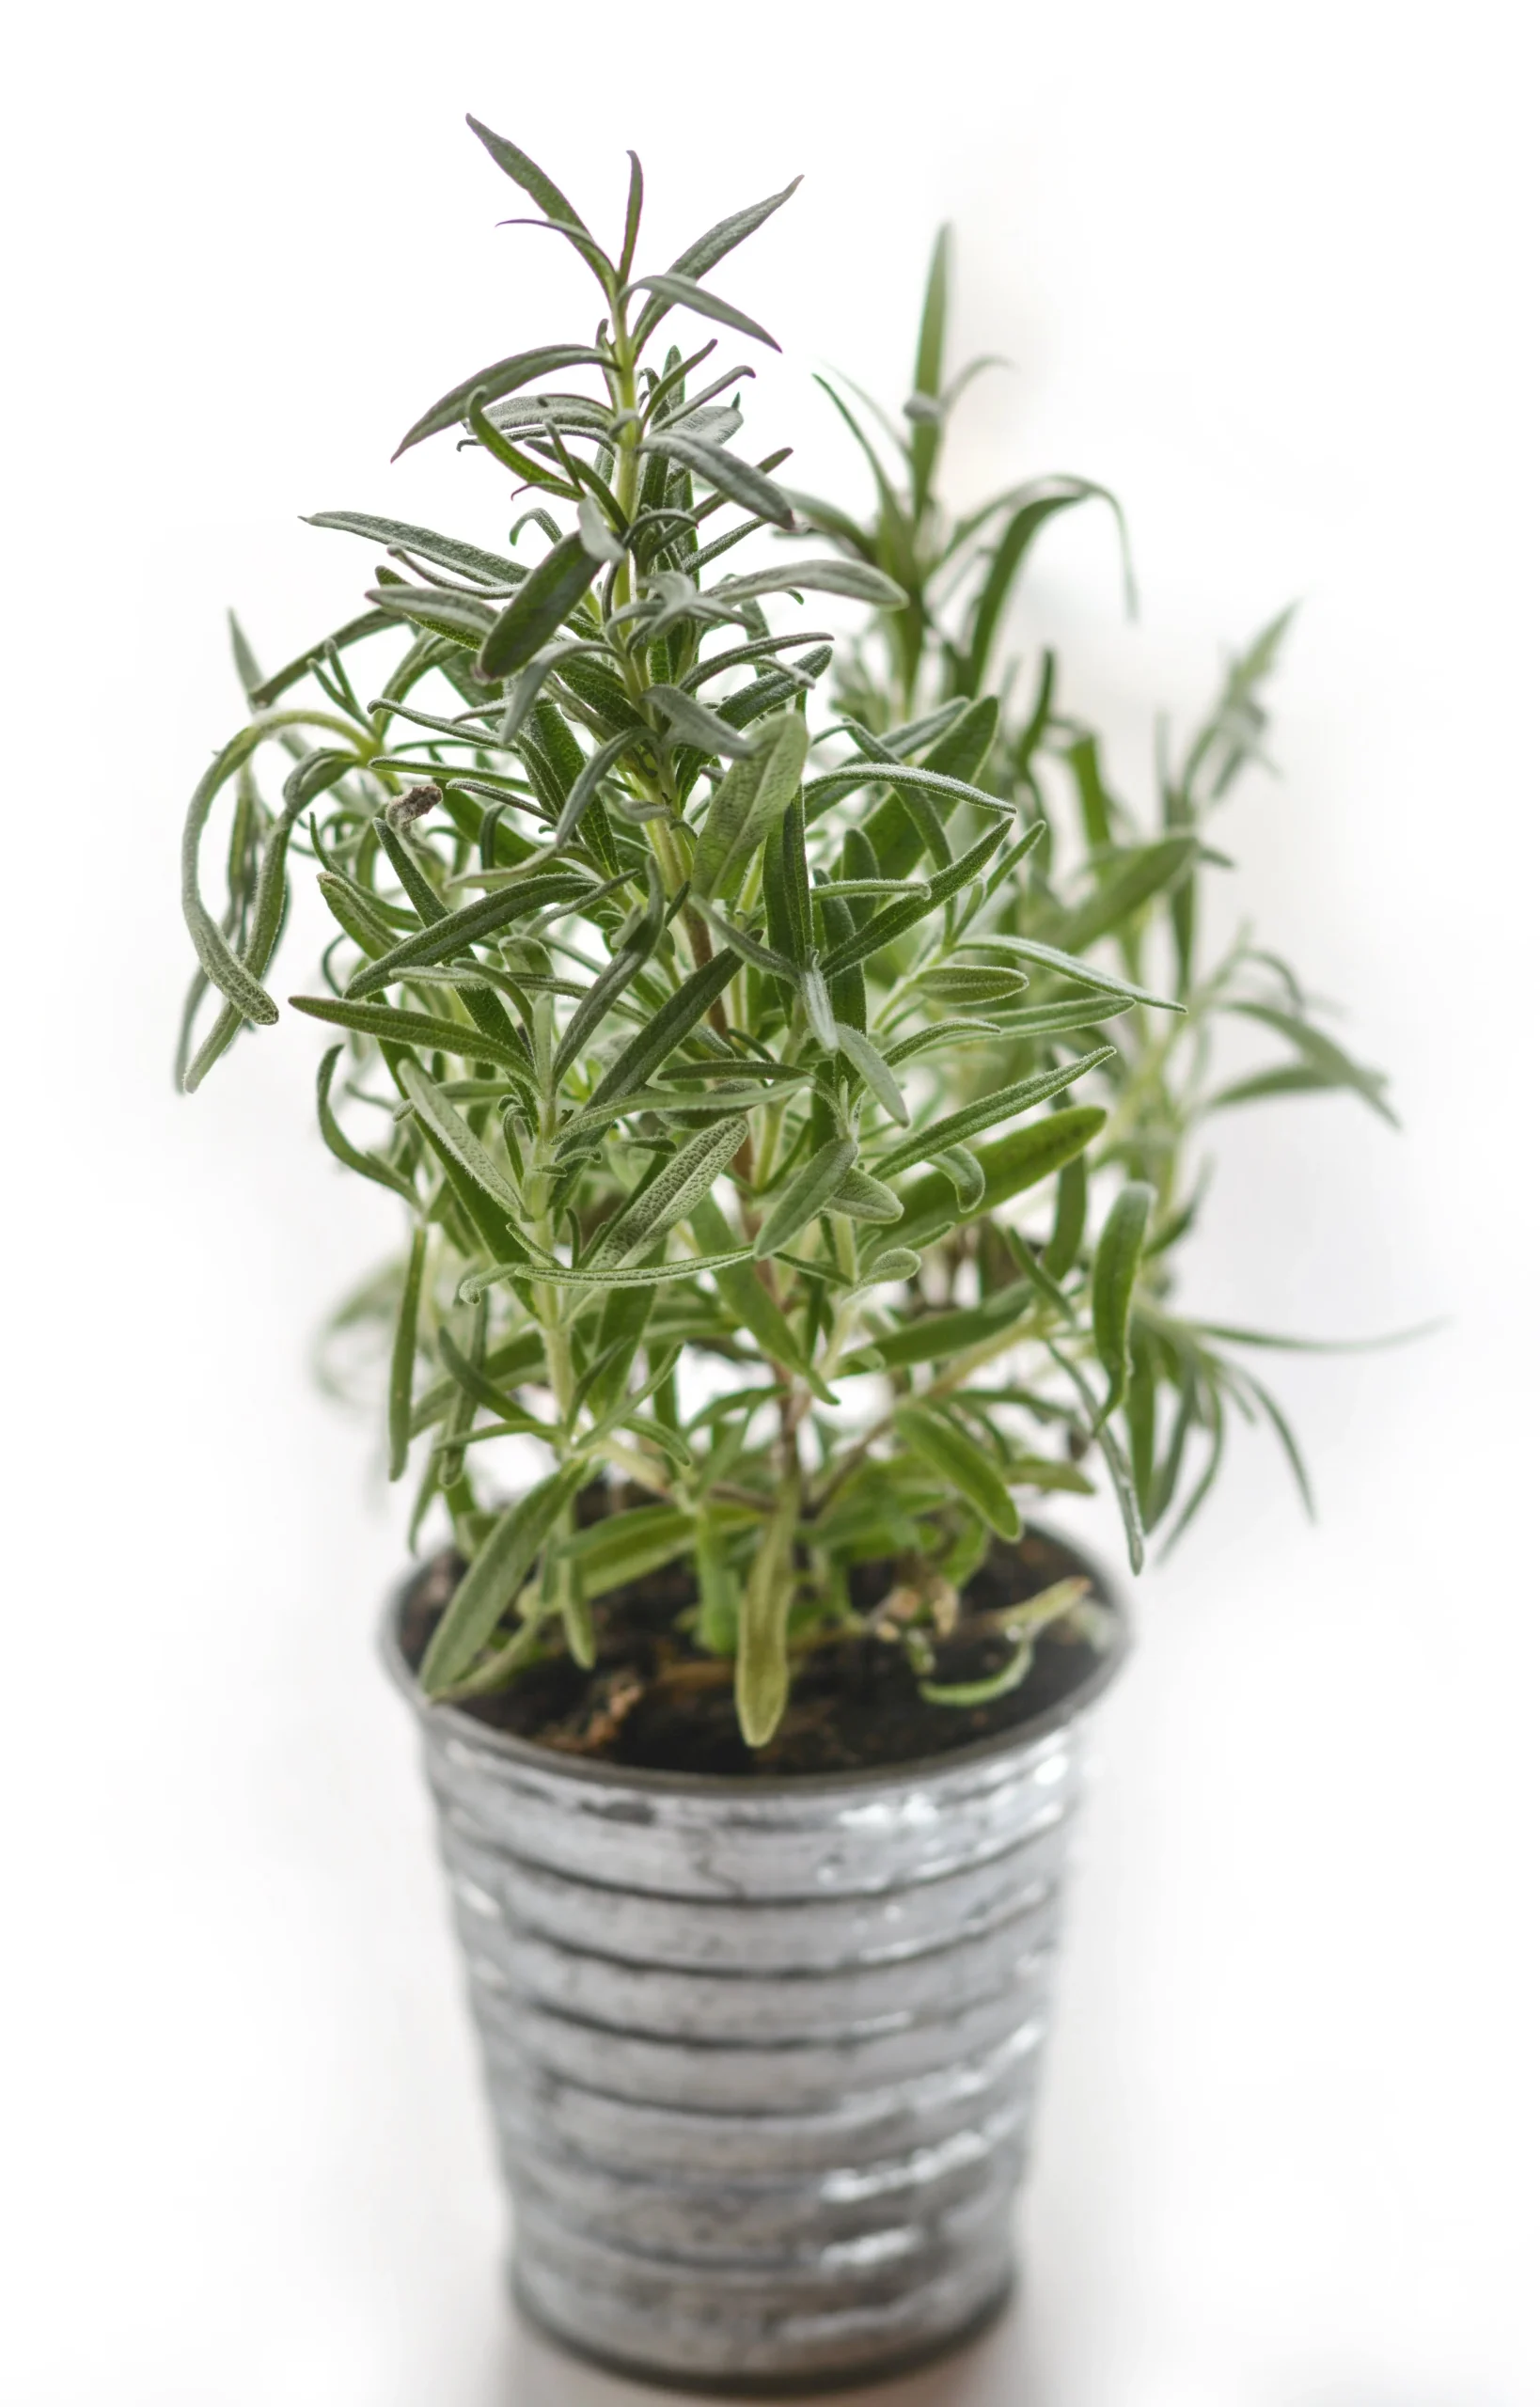 Rosemary Spiritual Meaning Is Good Luck